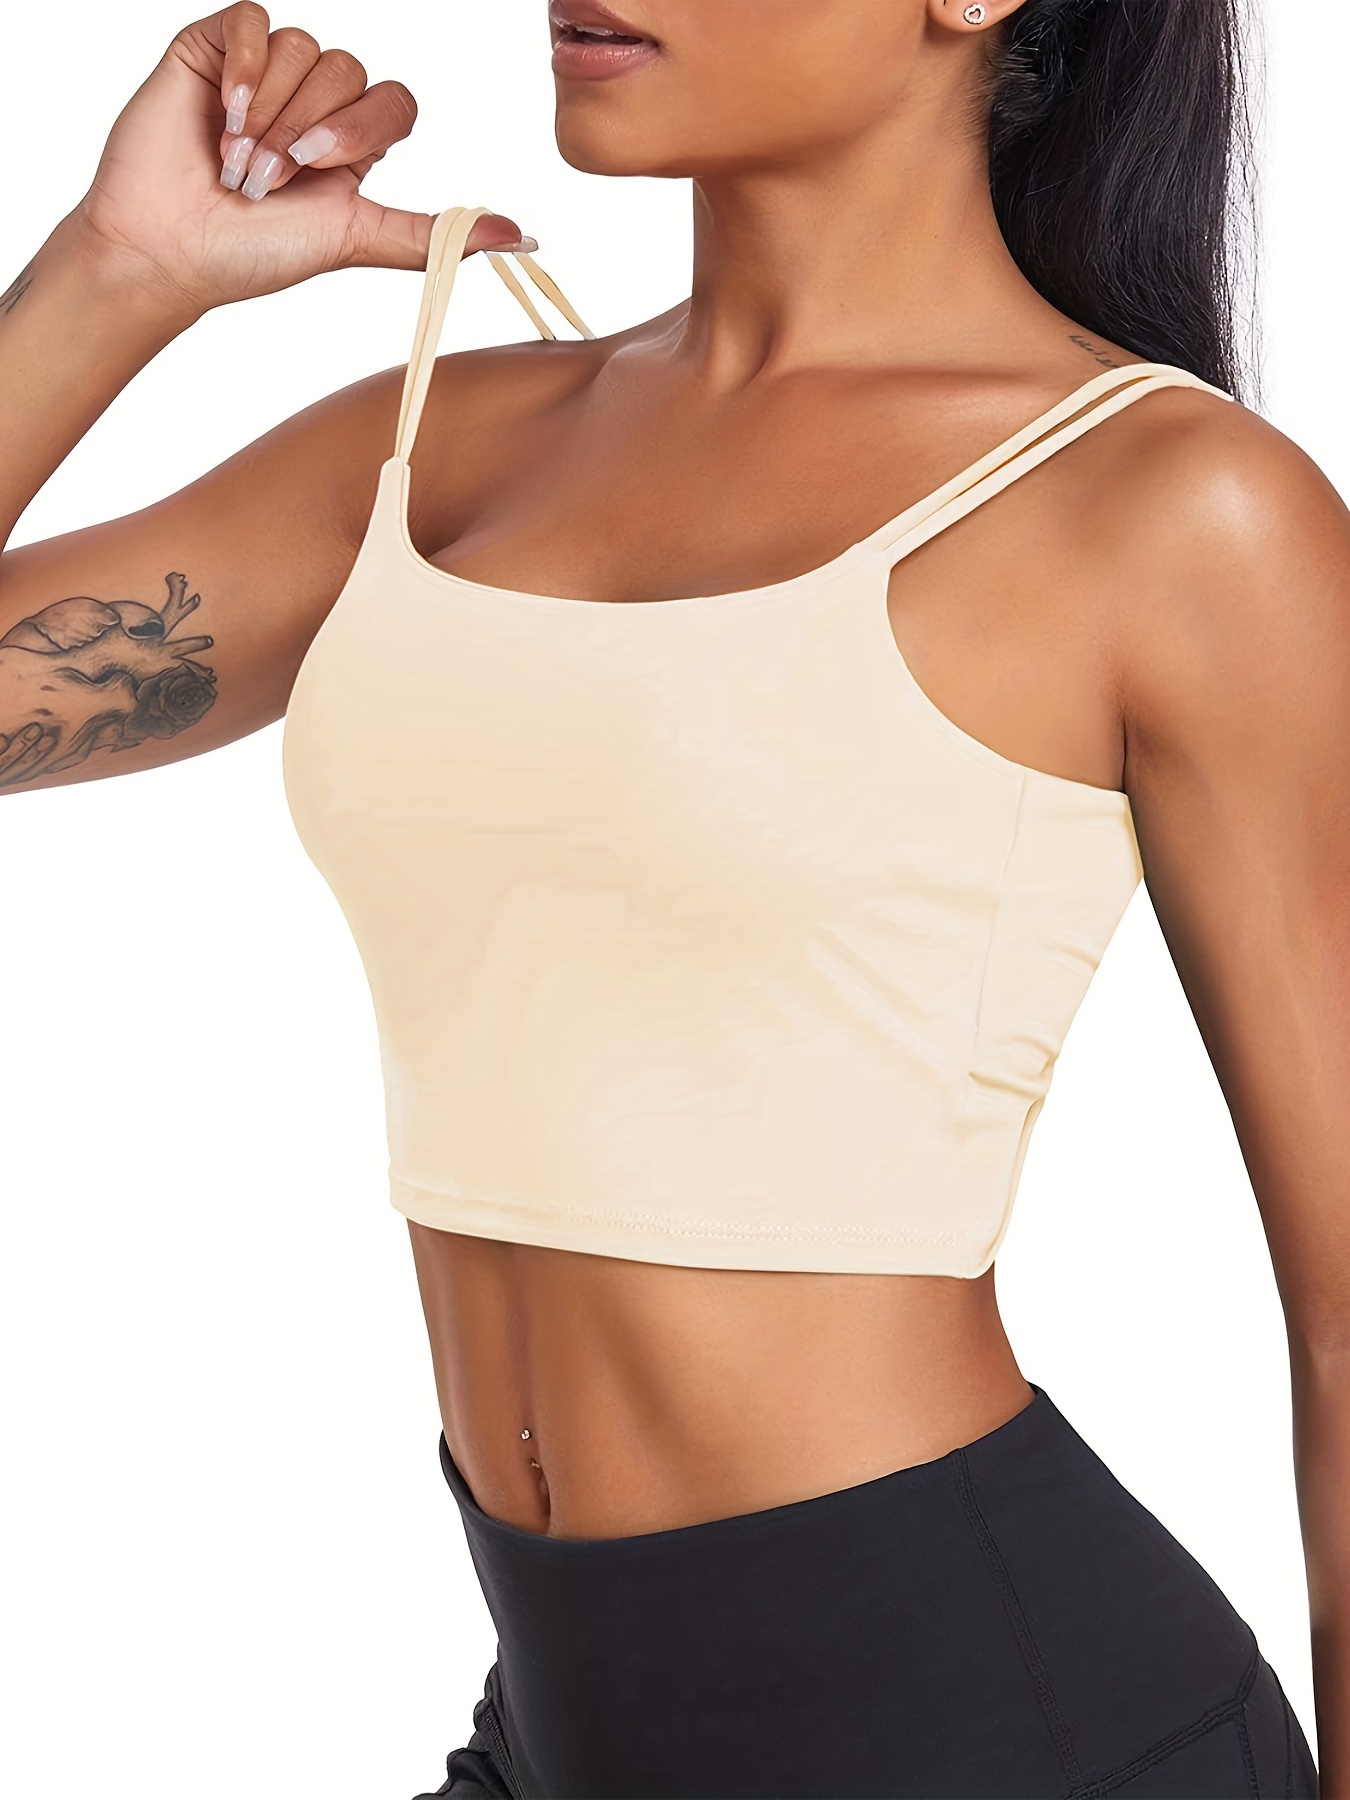  Backless Workout Tops For Women Twist Back Sports